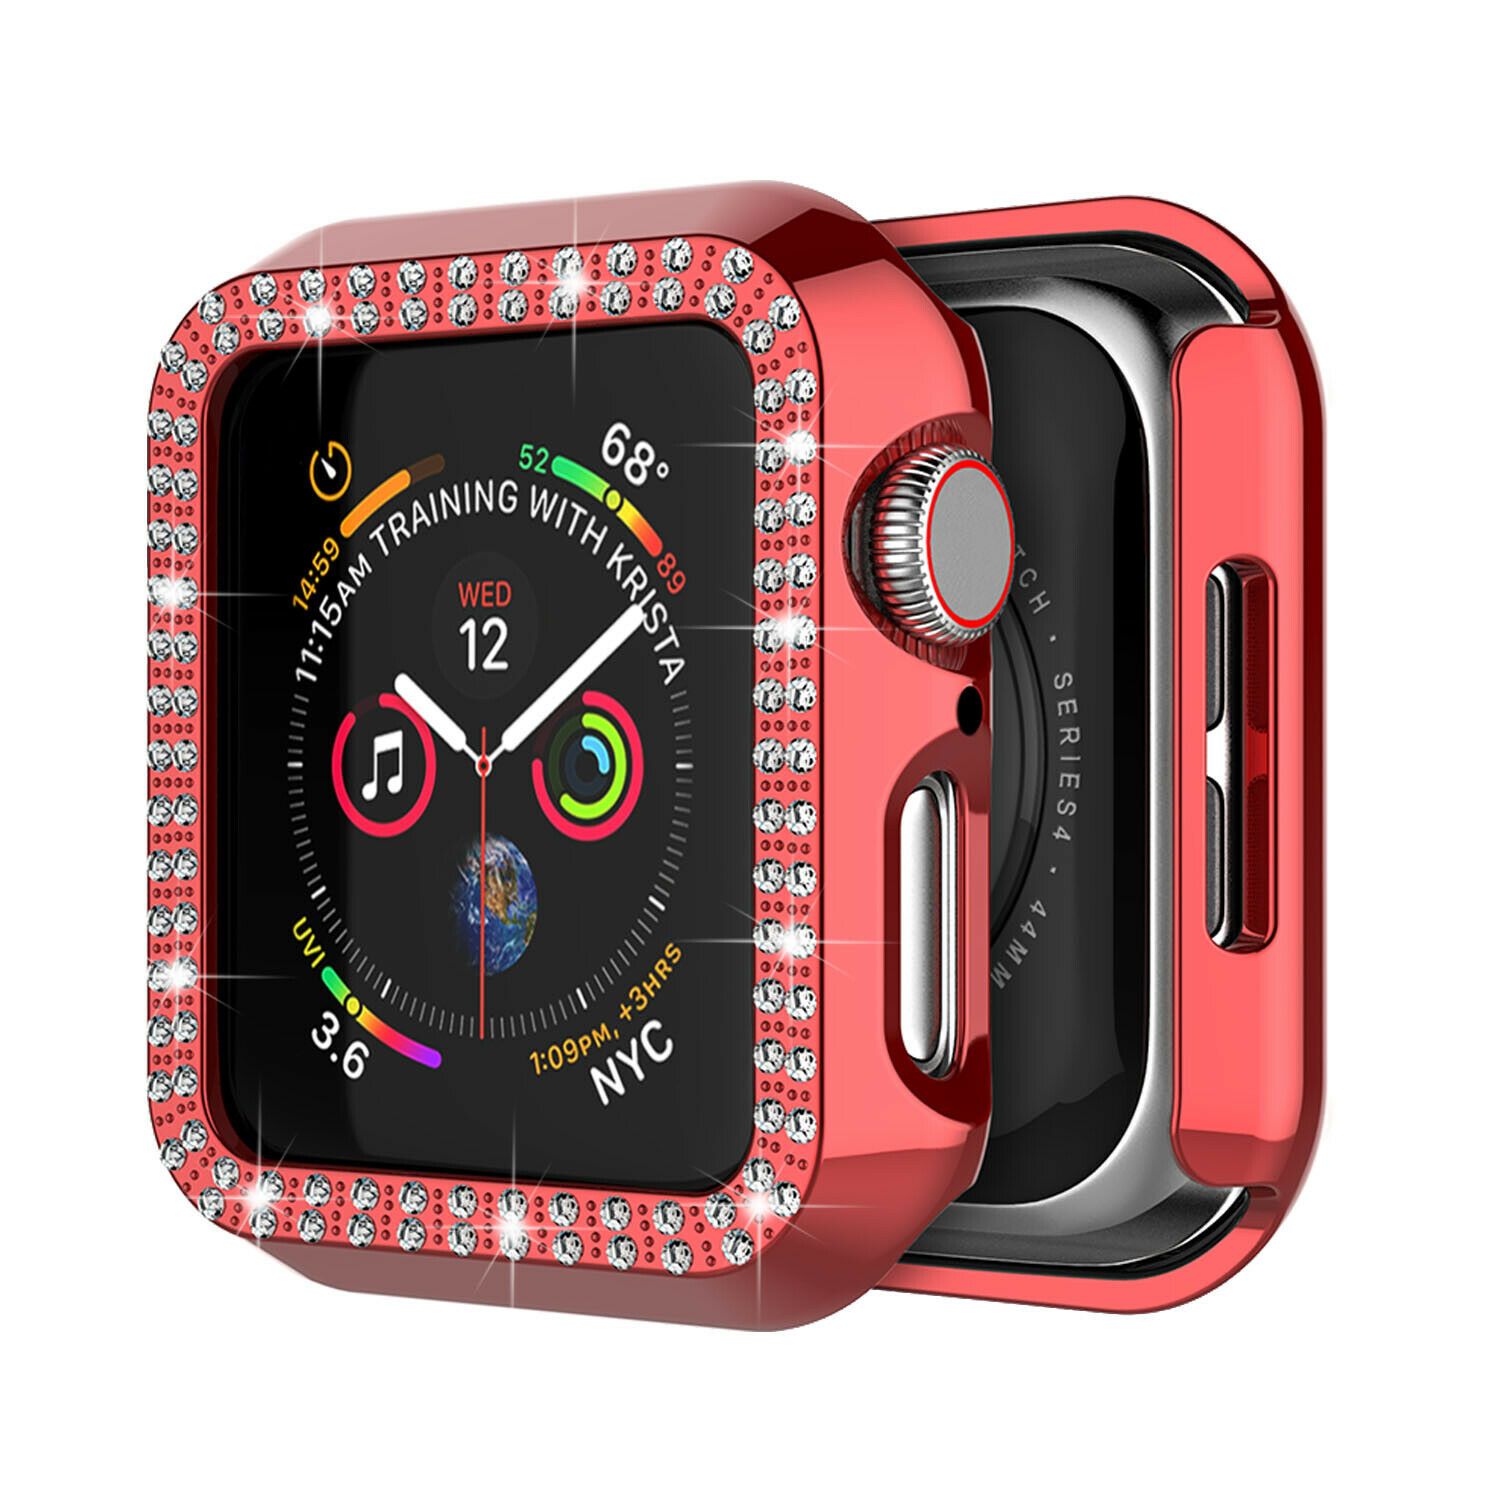 Crystal Diamond Protector Case Cover for Apple Watch 38/40/42/44 mm Series 5/4/3 ebizware Red 38mm (Series 3/2/1) 